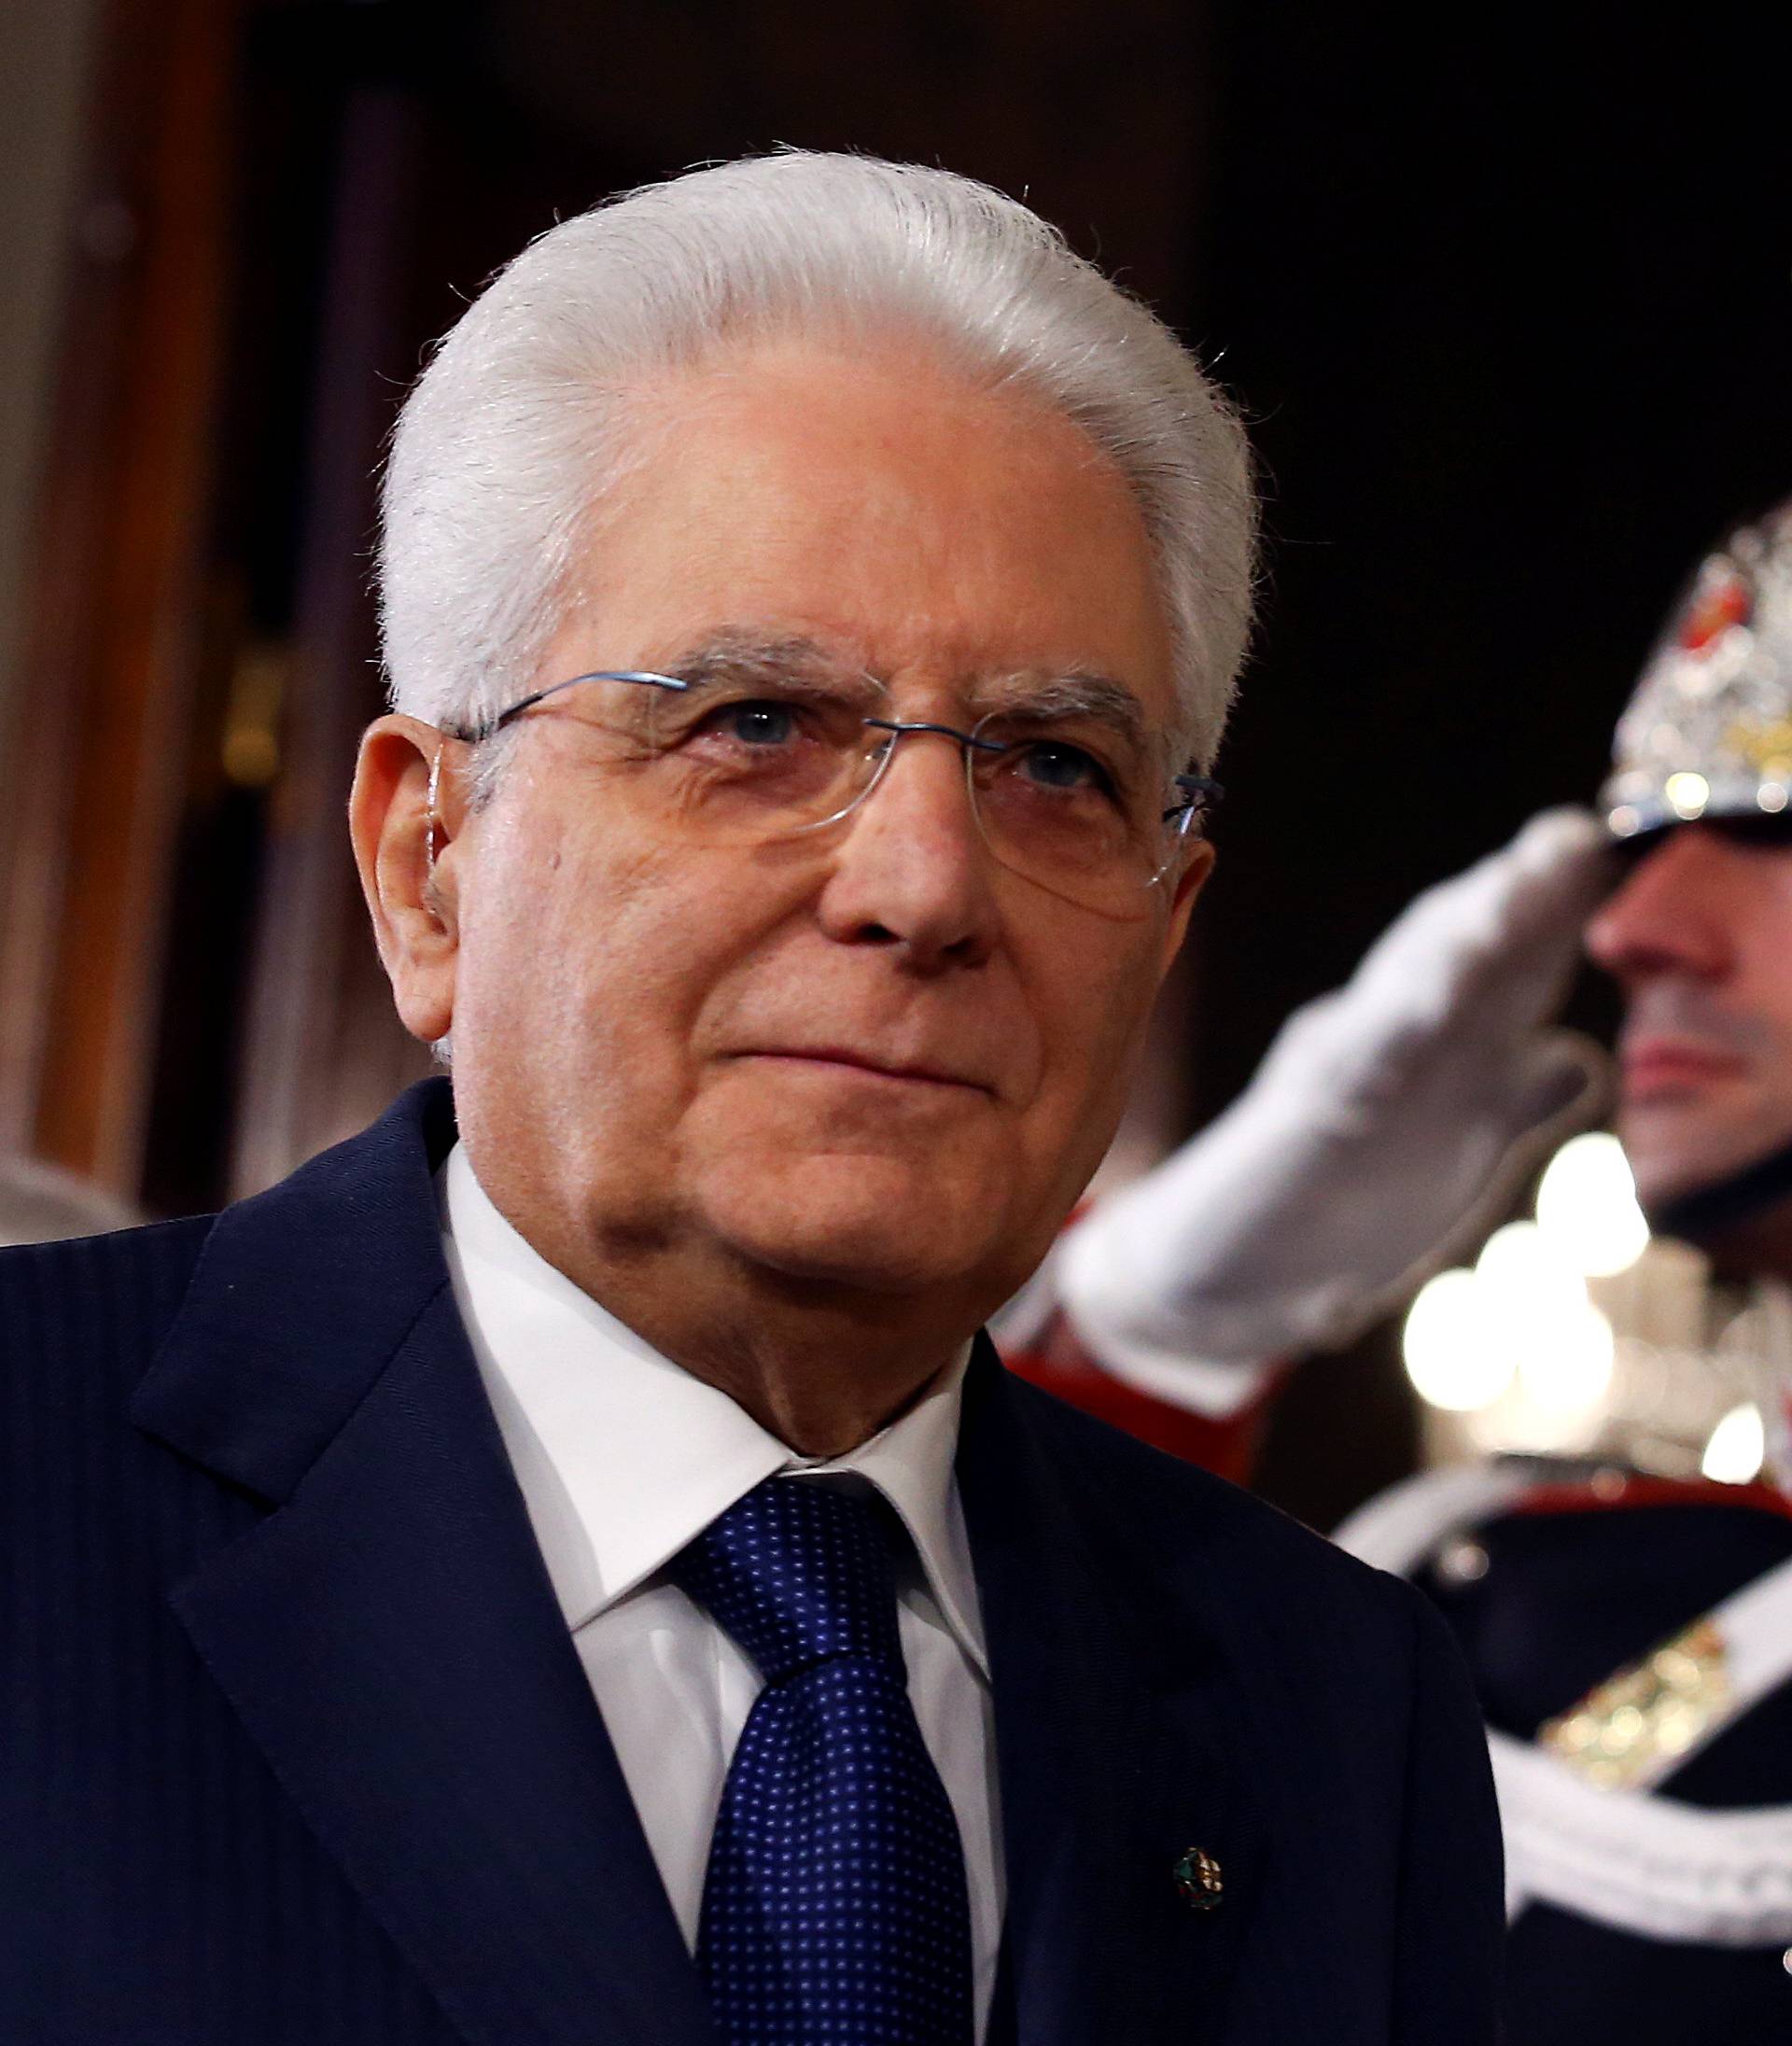 Italian President Sergio Mattarella leaves after speaking to the media during the second day of consultations at the Quirinal Palace in Rome